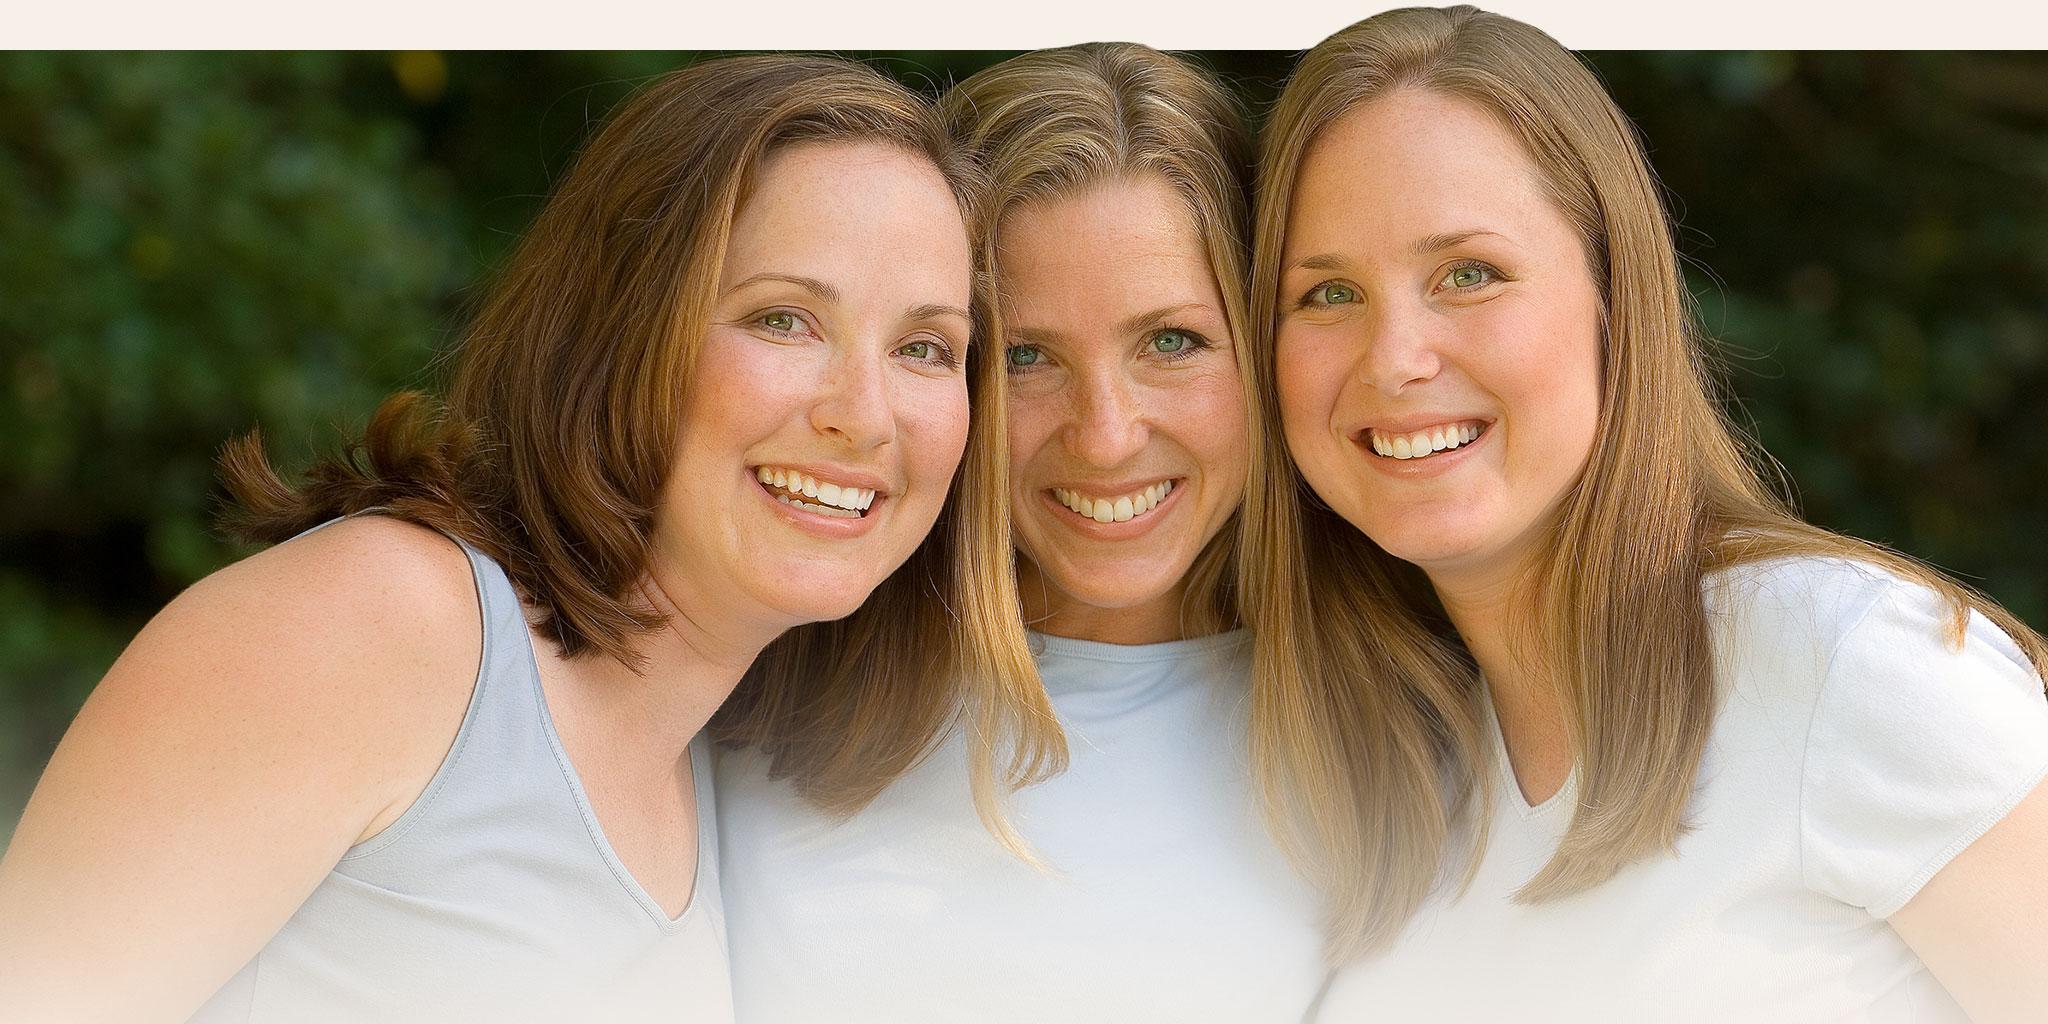 Three women posing and smiling for a group photo